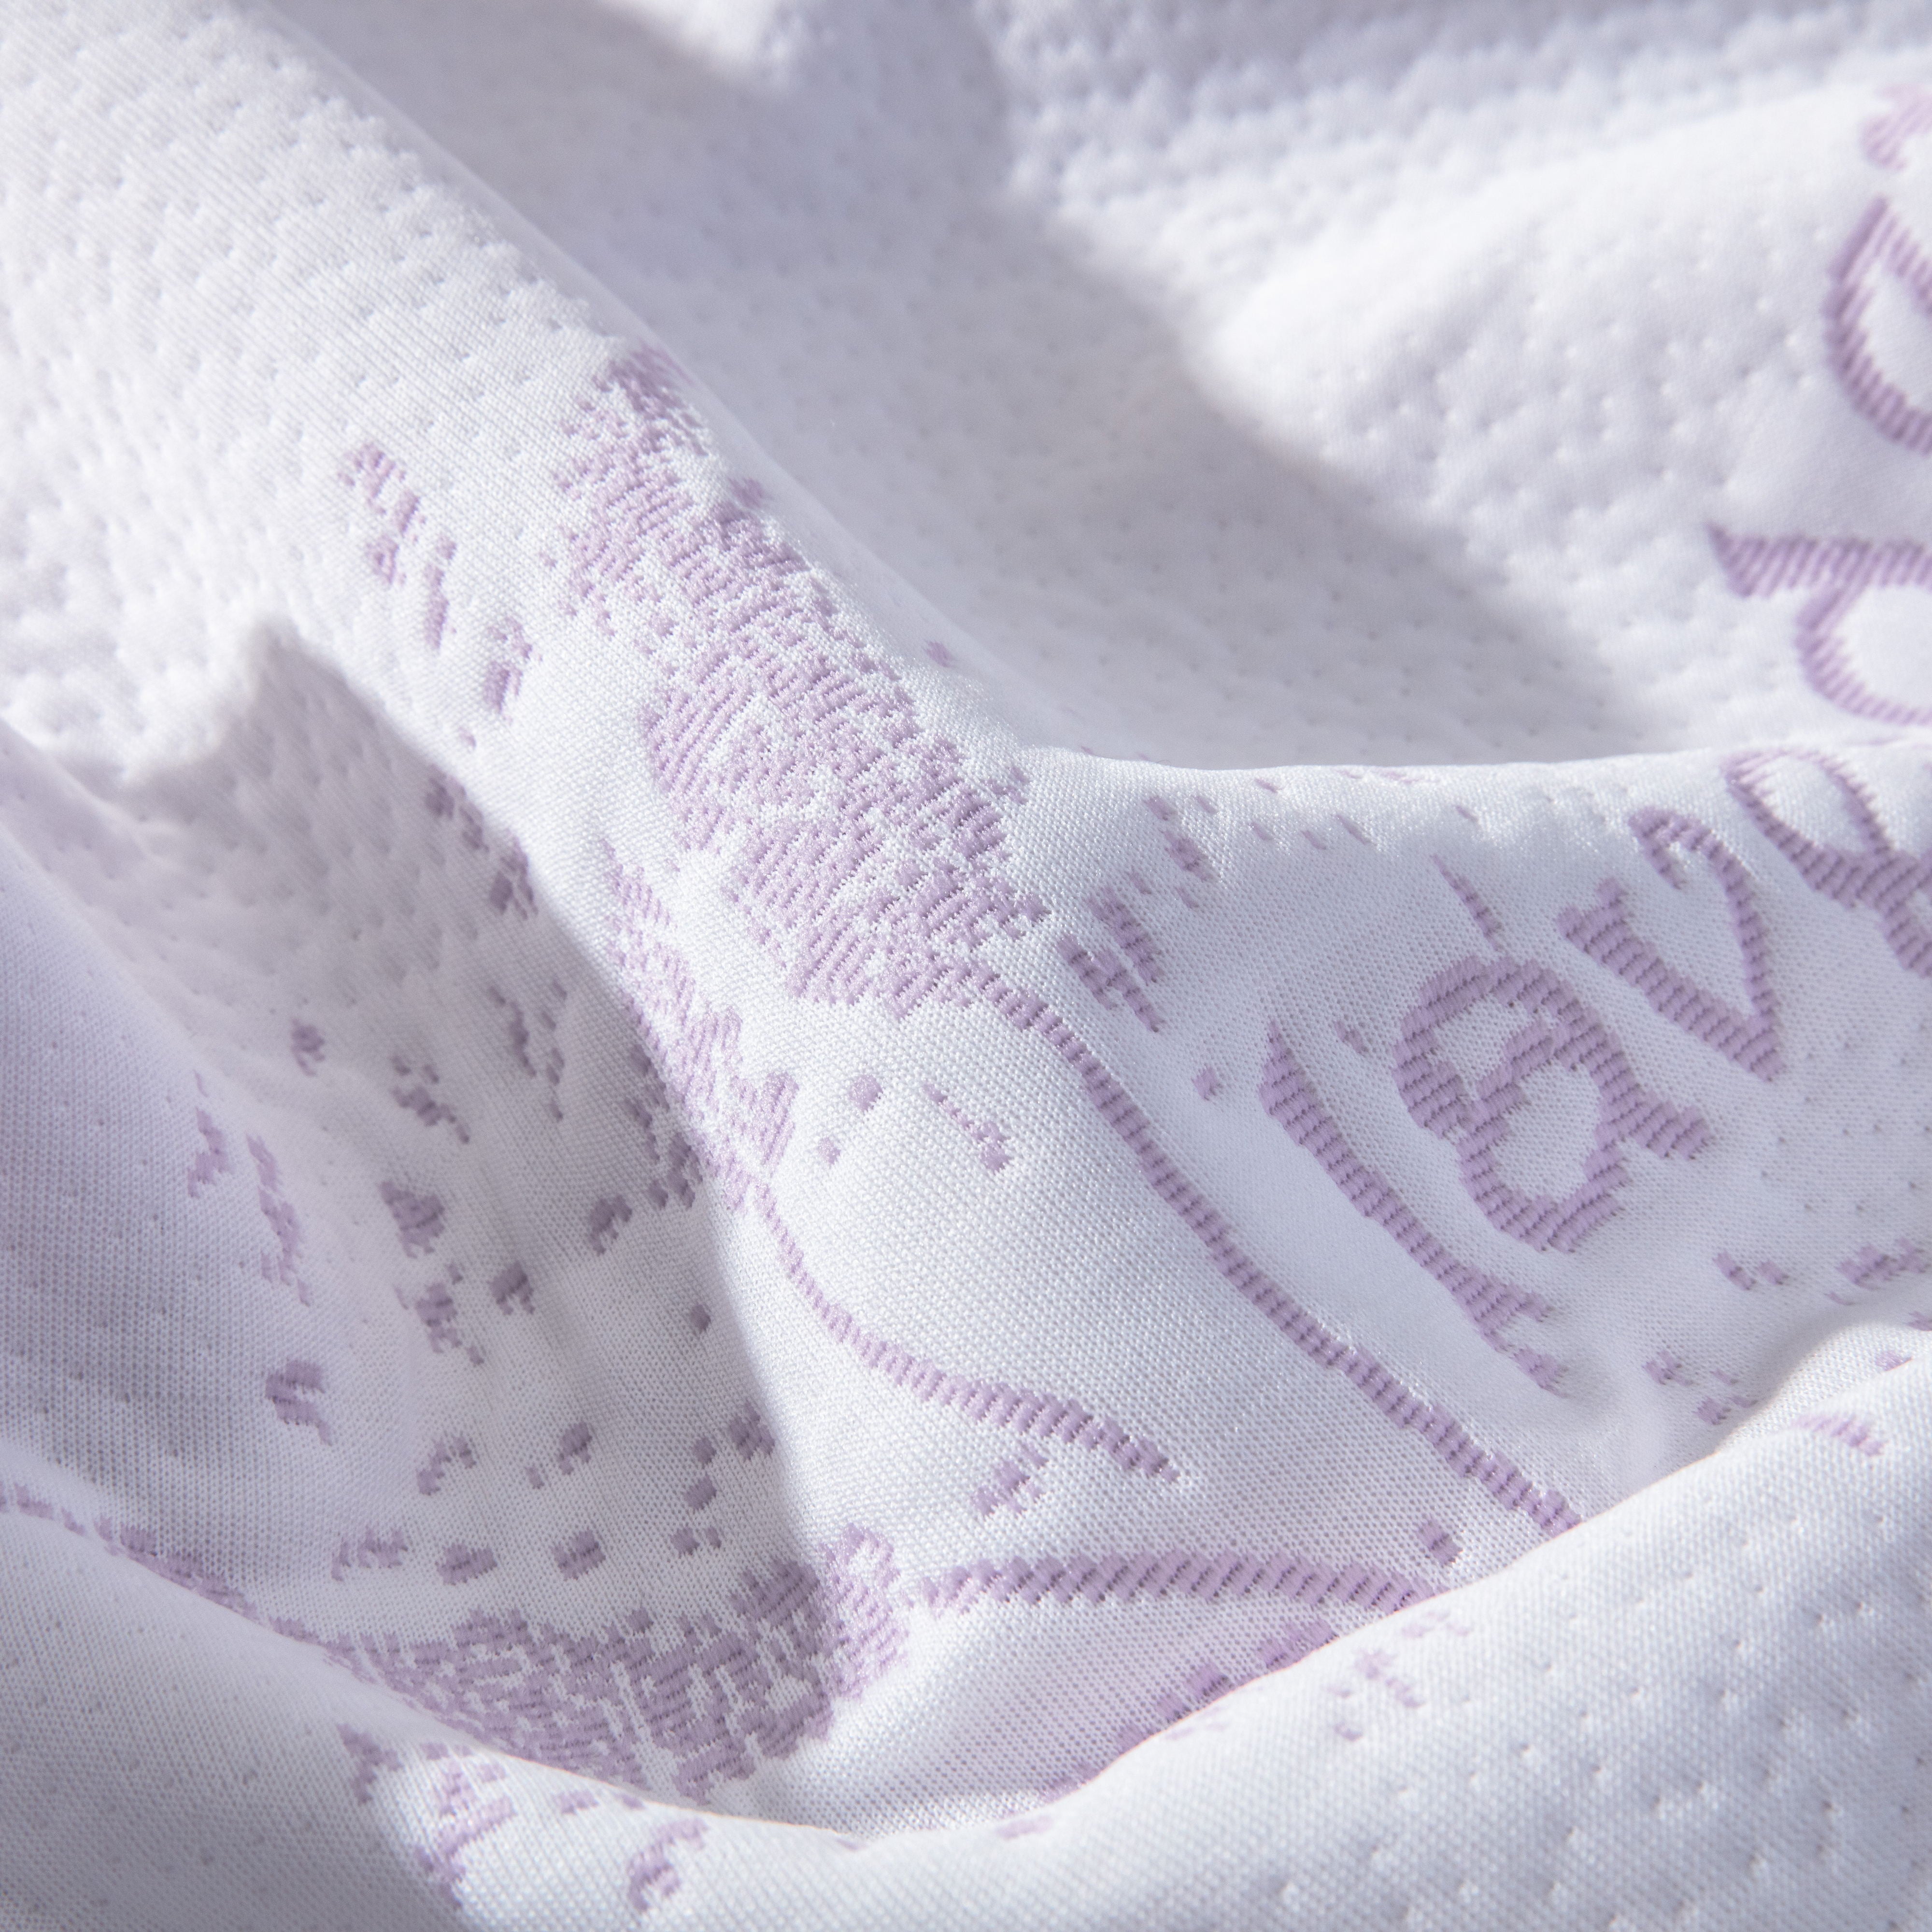 Lavender Infused Scented Mattress pad